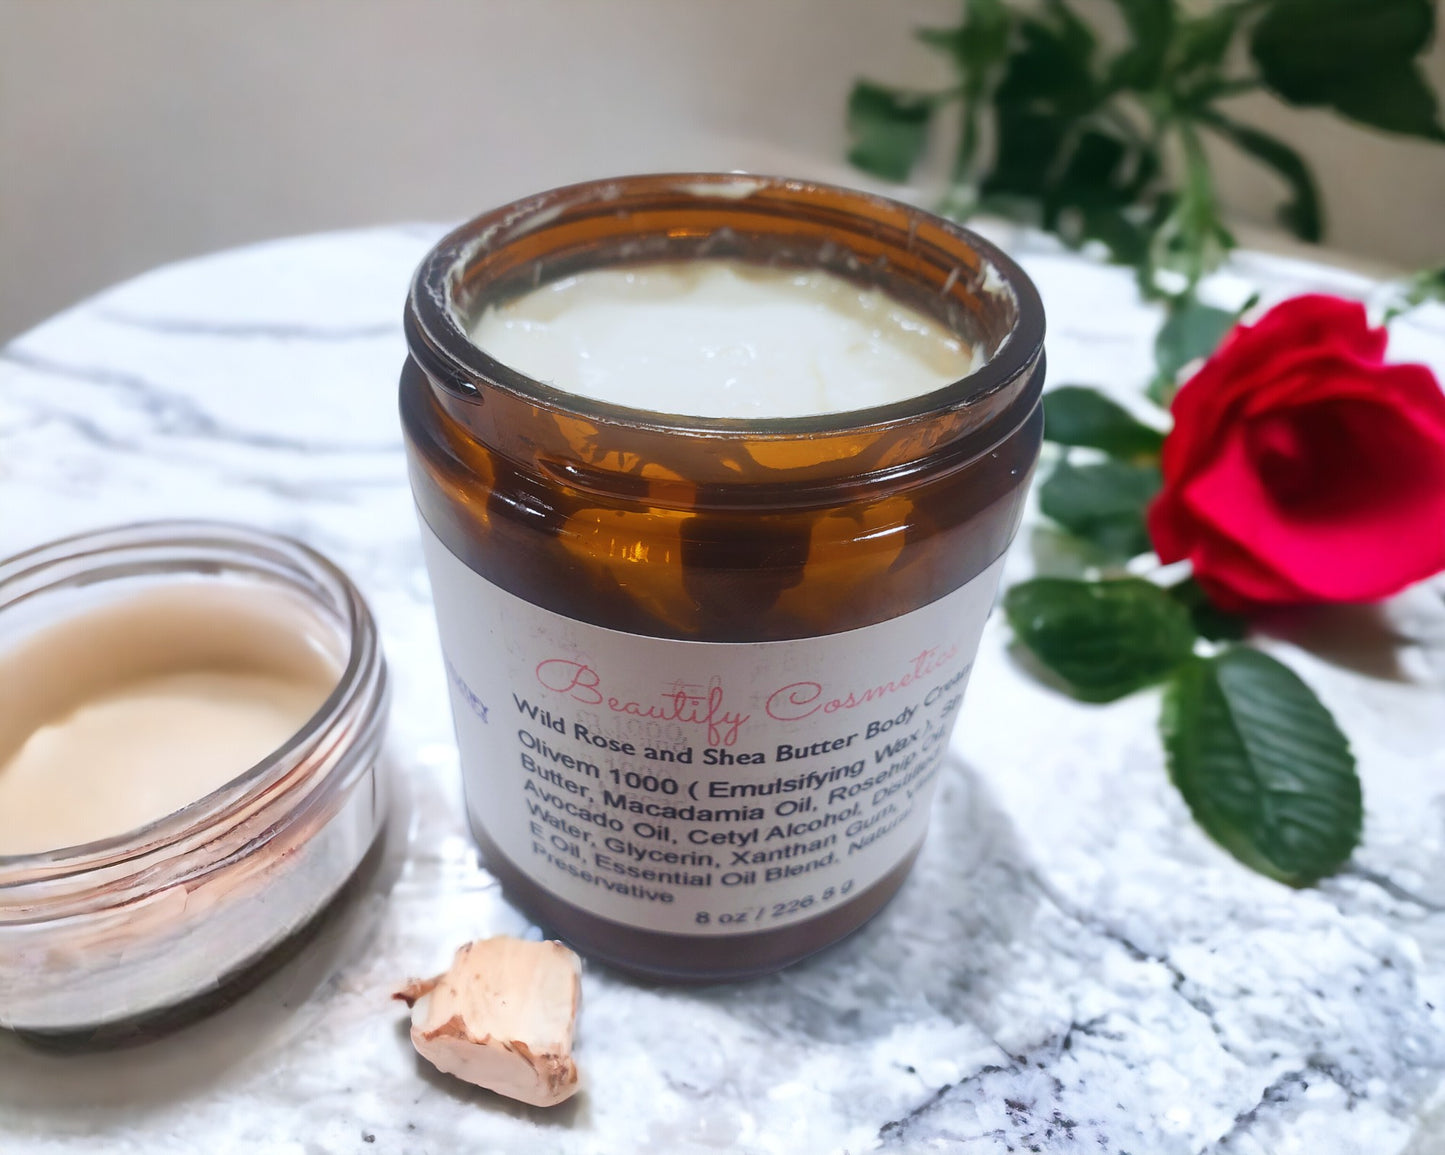 Wild Rose and Shea Butter Cream